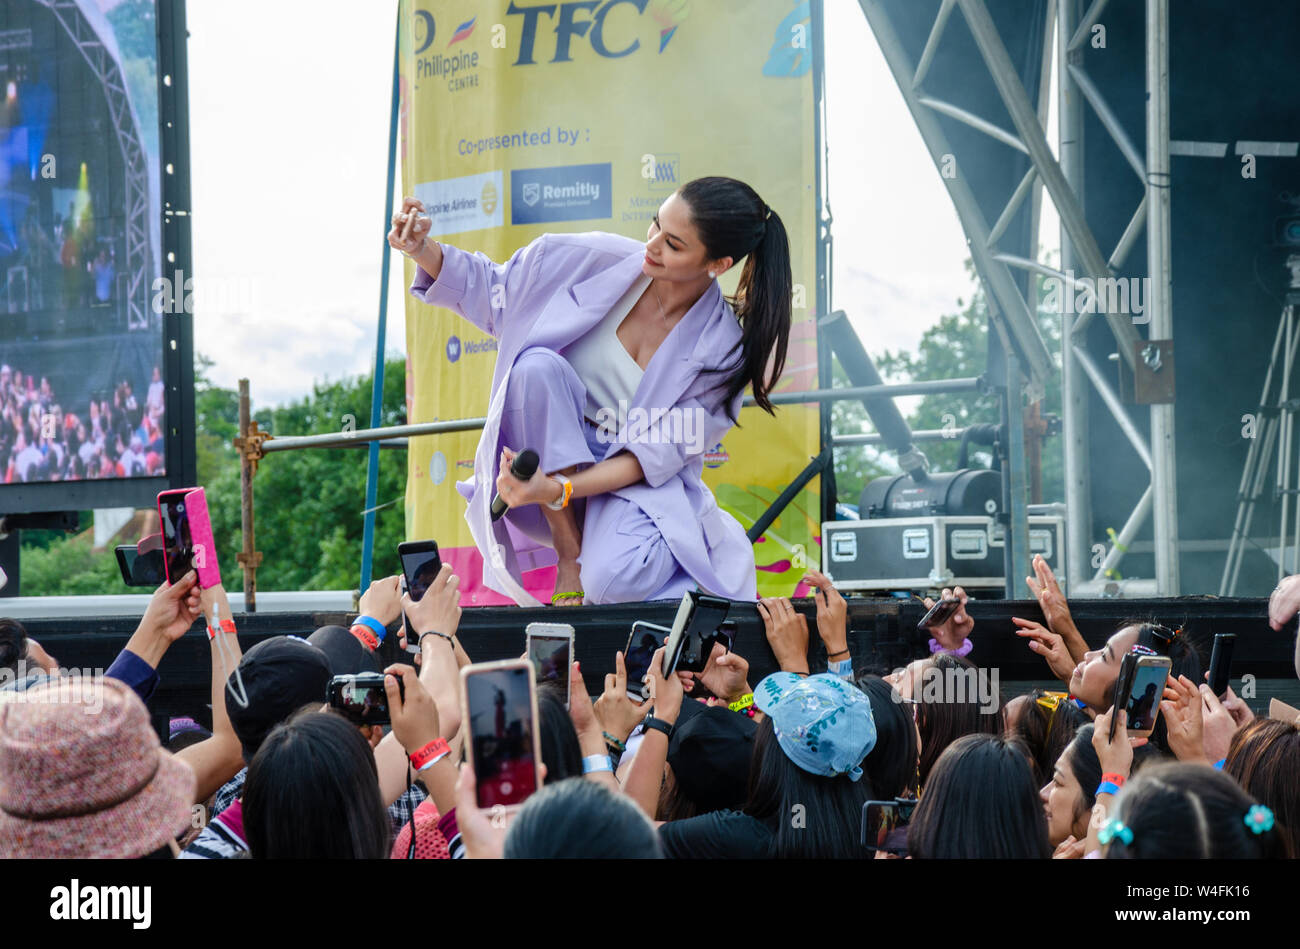 Pia Wurtzbach, a Filipino celebrity and former Miss Universe poses for a selfie with fans while performing on stage at a cultural event in London. Stock Photo